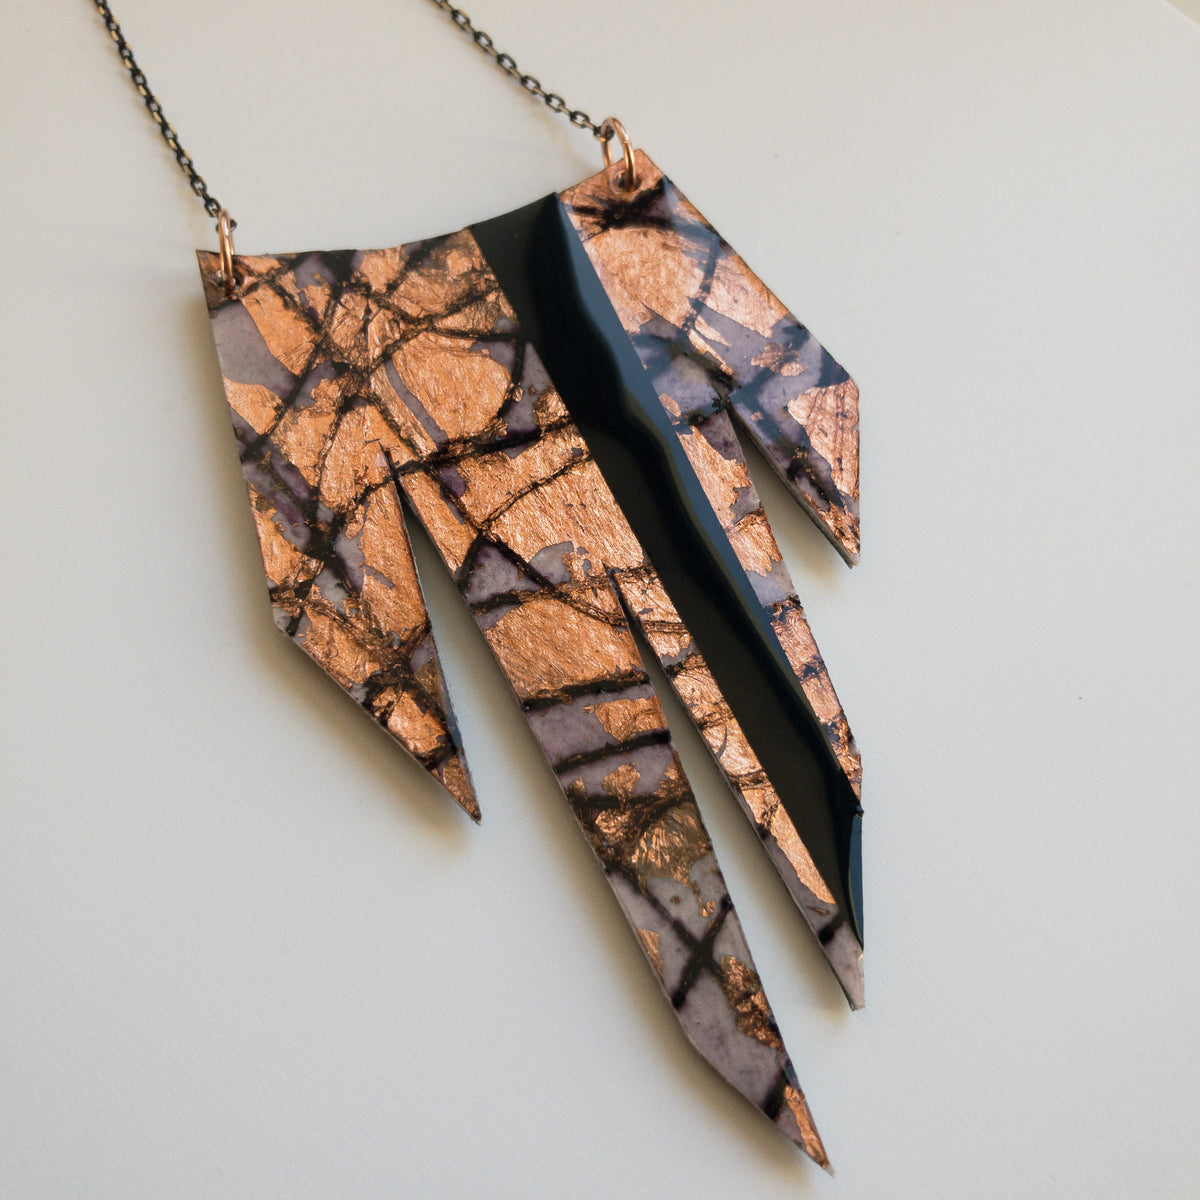 Sybby batik textile necklace in aubergine/rose-gold with black stripe detail